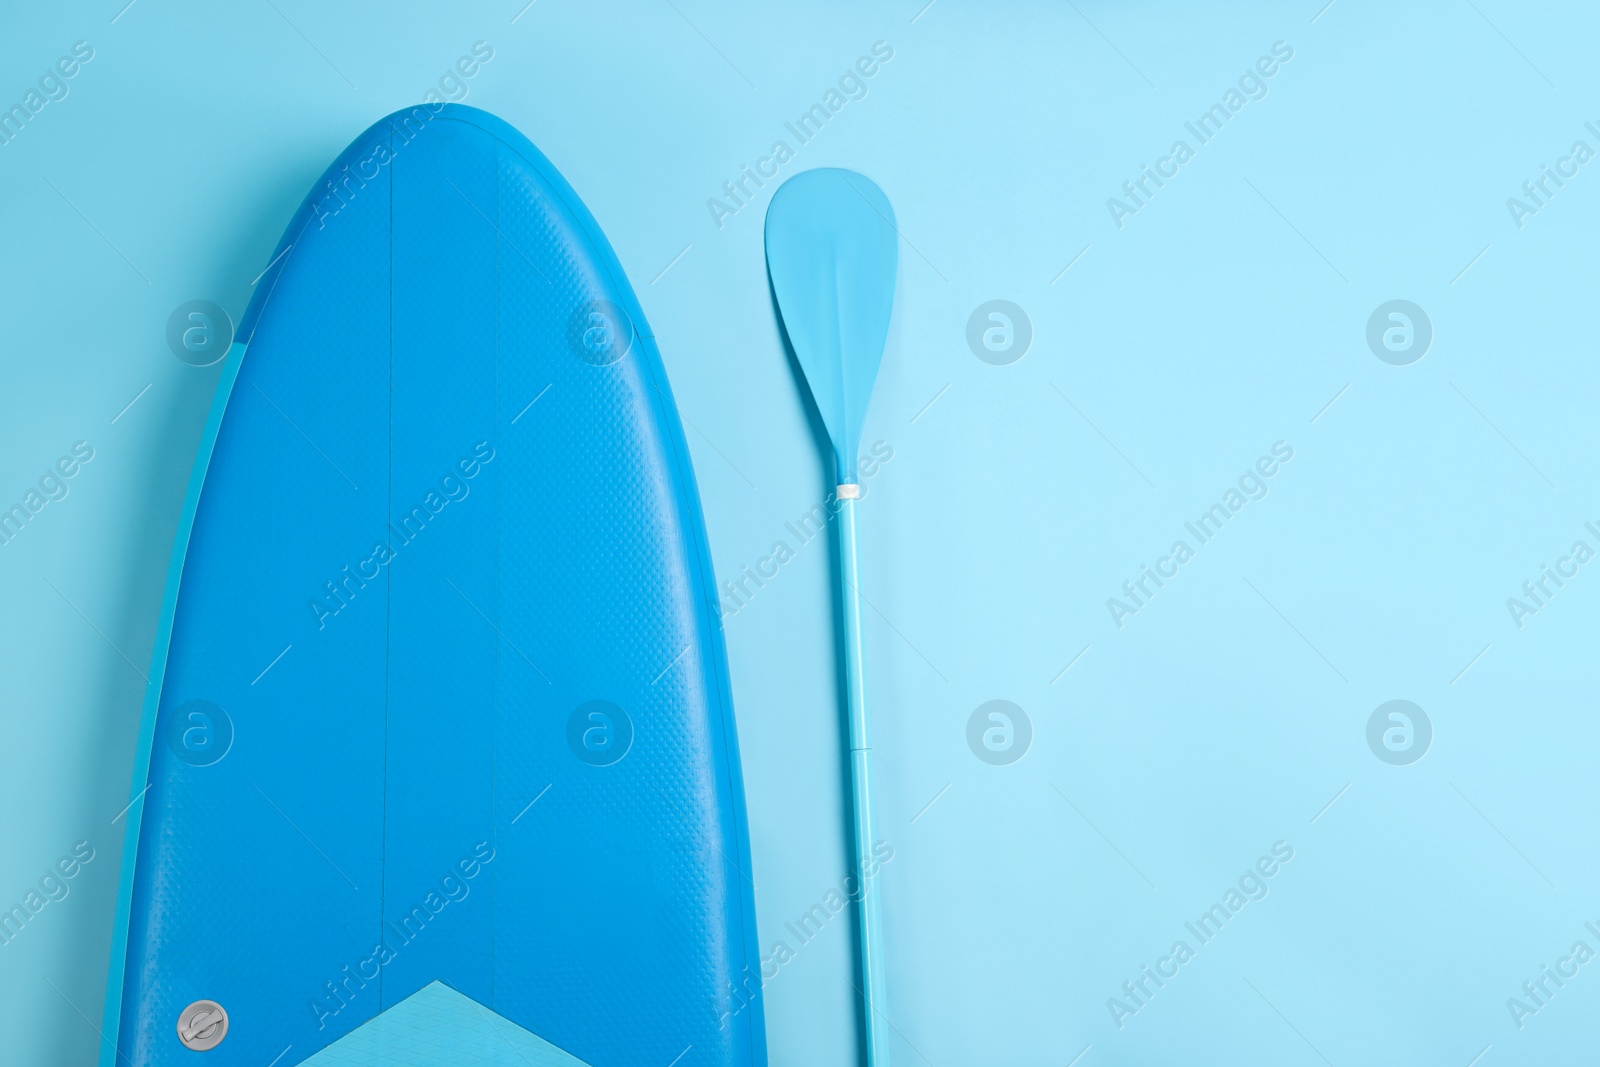 Photo of Board and paddle for standup paddleboarding (SUP) on light blue background, flat lay. Space for text